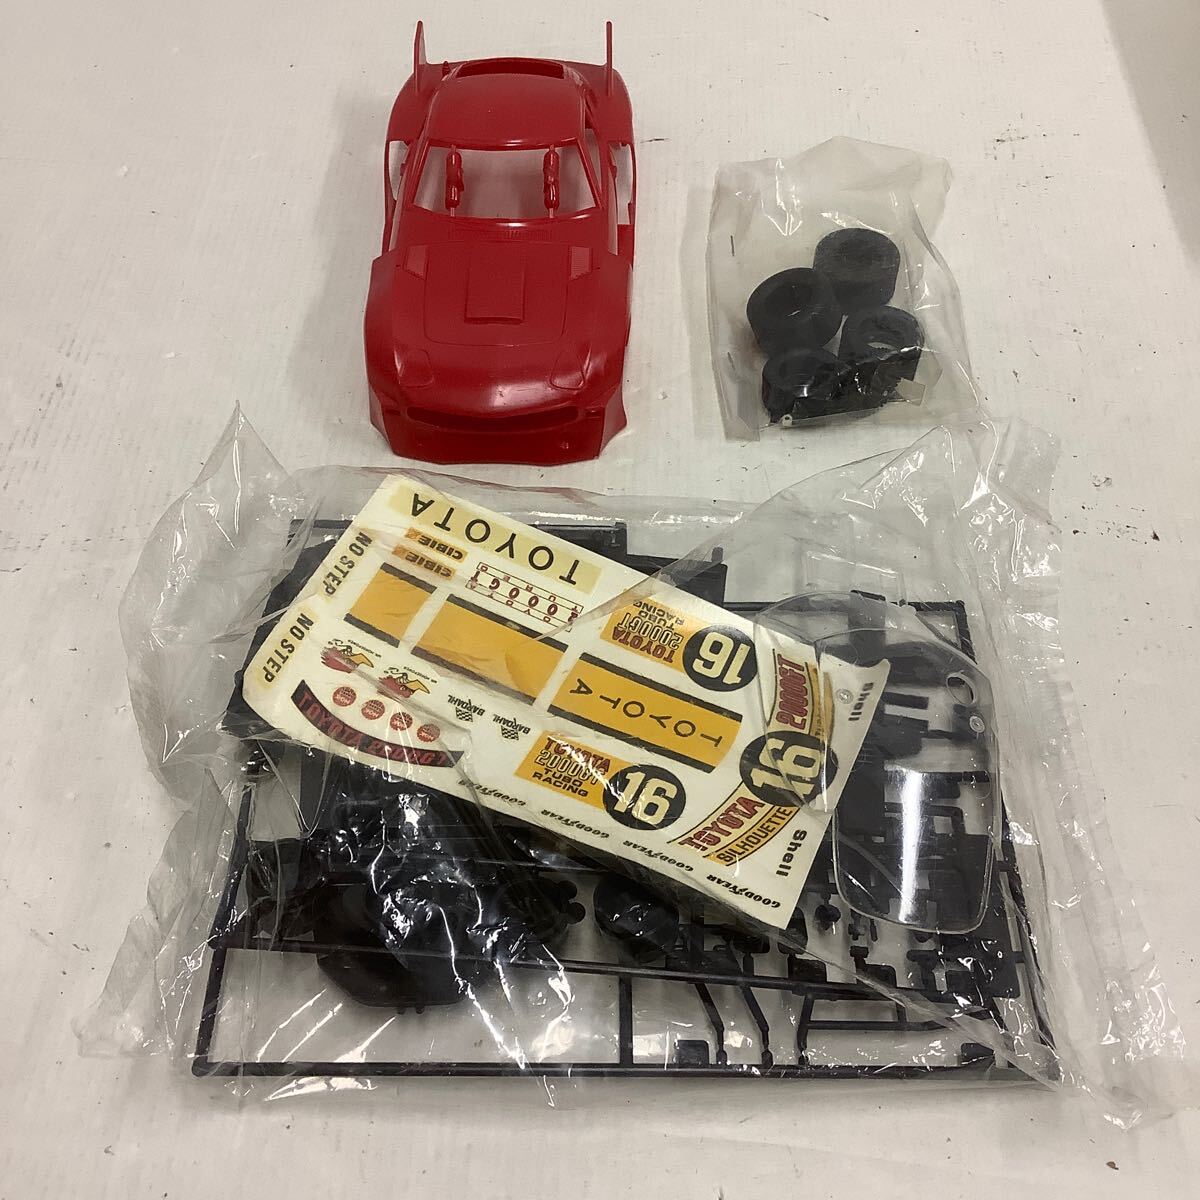 42 [ not yet constructed goods ]1/24 IDENTICAL SCALE Maserati melakSS Toyota 2000GT turbo Silhouette plastic model 2 piece set (100)